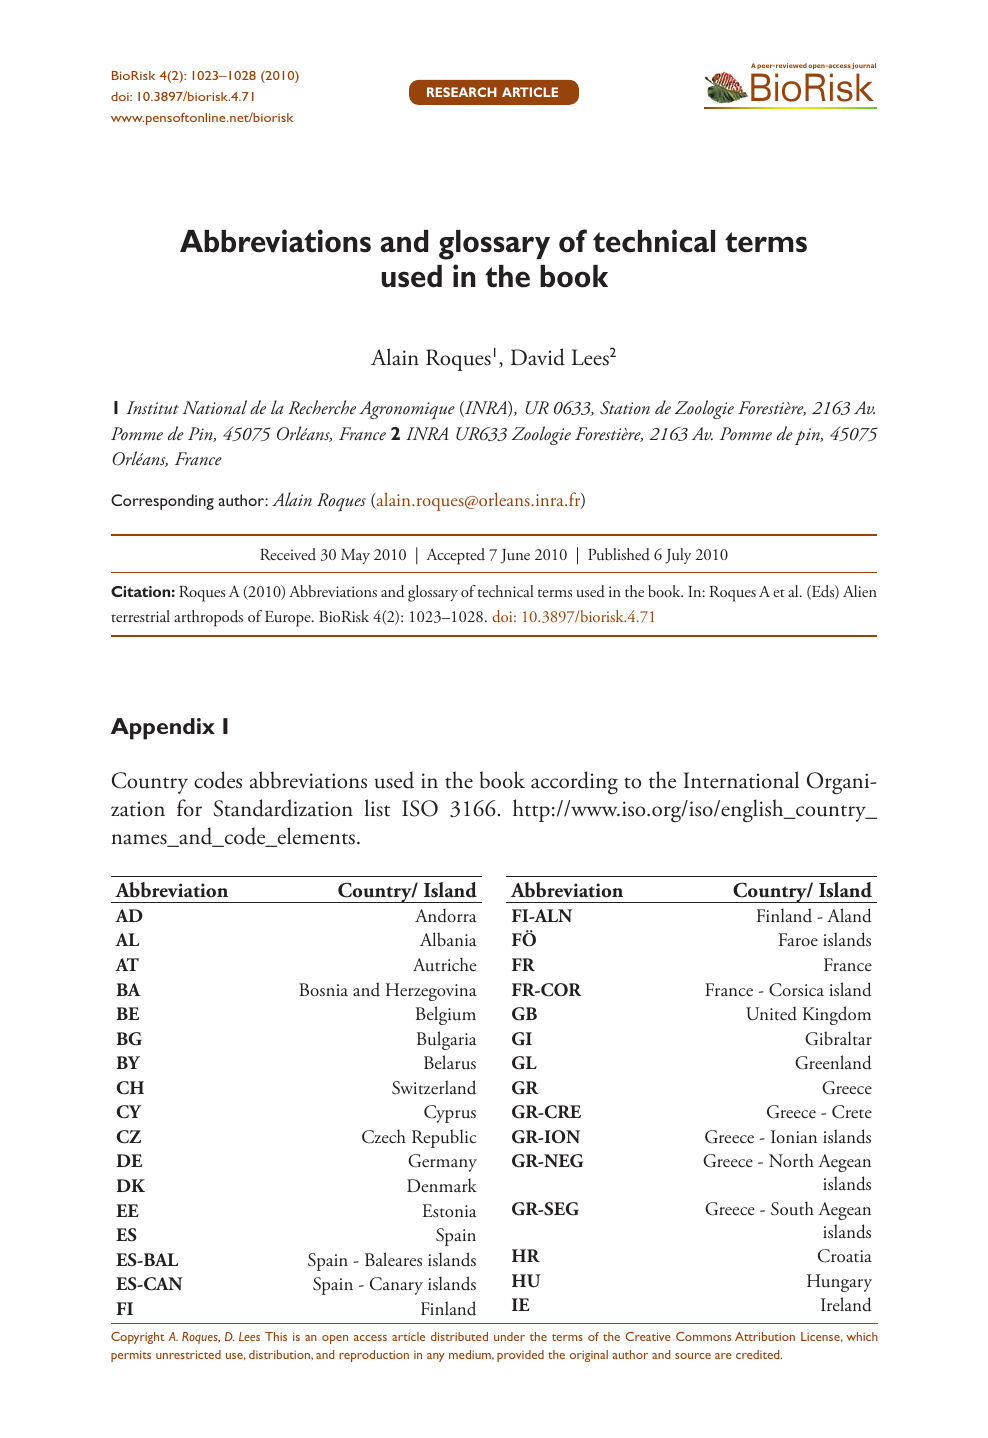 Abbreviations and glossary of technical terms used in the book – topic of  research paper in Biological sciences. Download scholarly article PDF and  read for free on CyberLeninka open science hub.